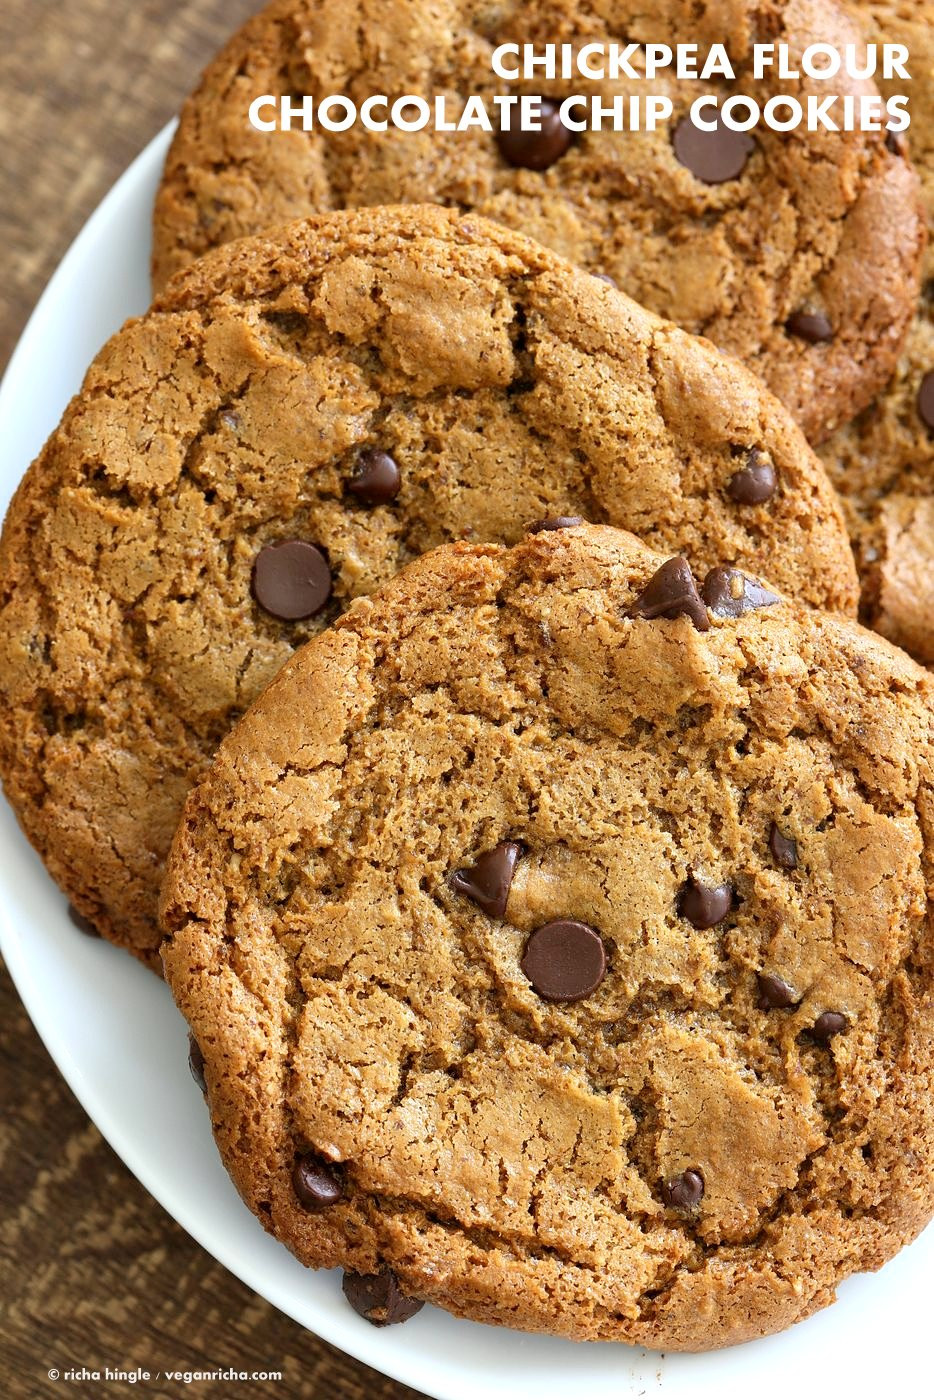 Chocolate Chip Cookies Baking Powder
 Chickpea Flour Chocolate Chip Cookies Gluten free Vegan